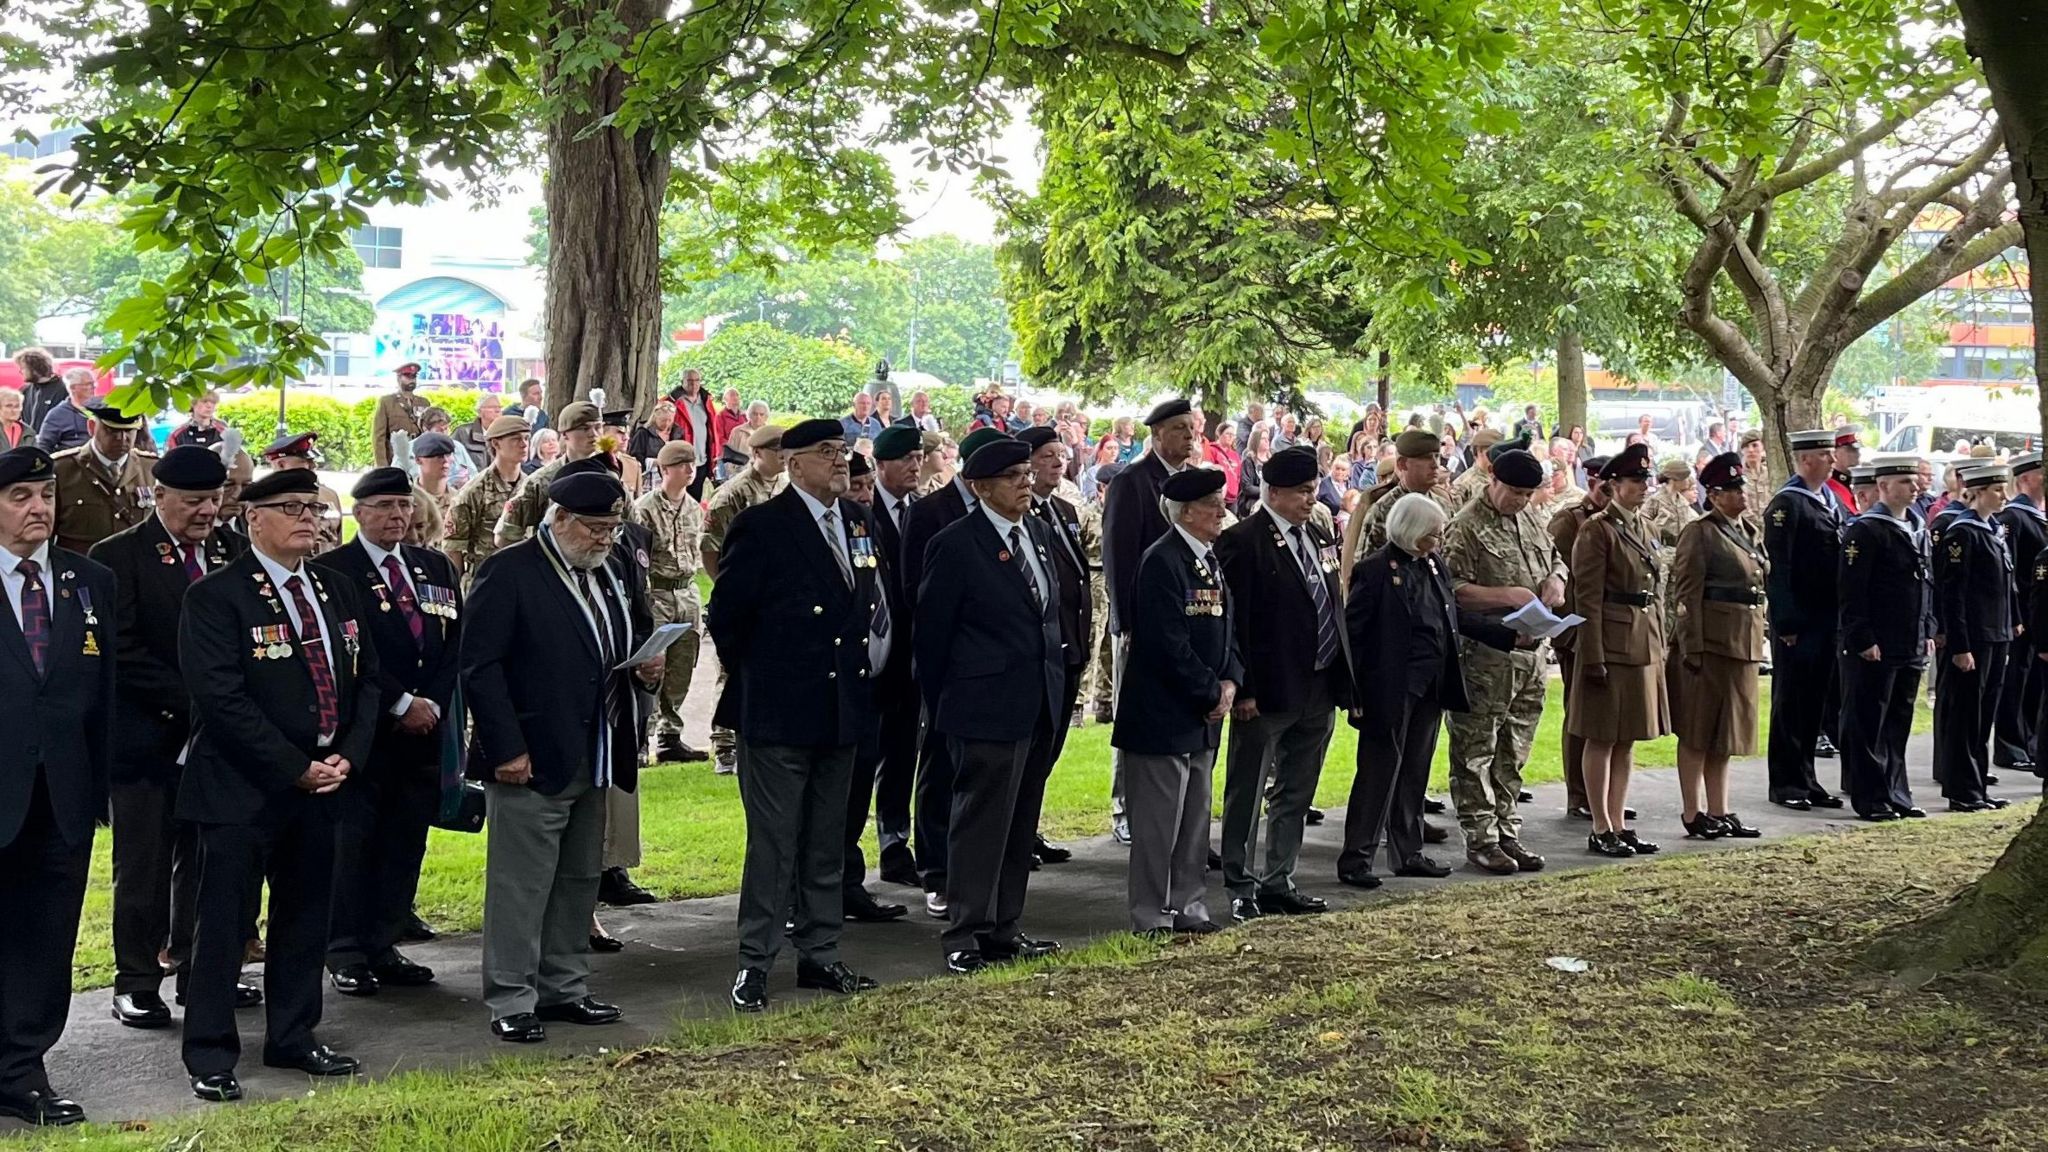 People gathered for D-Day event in Wrexham